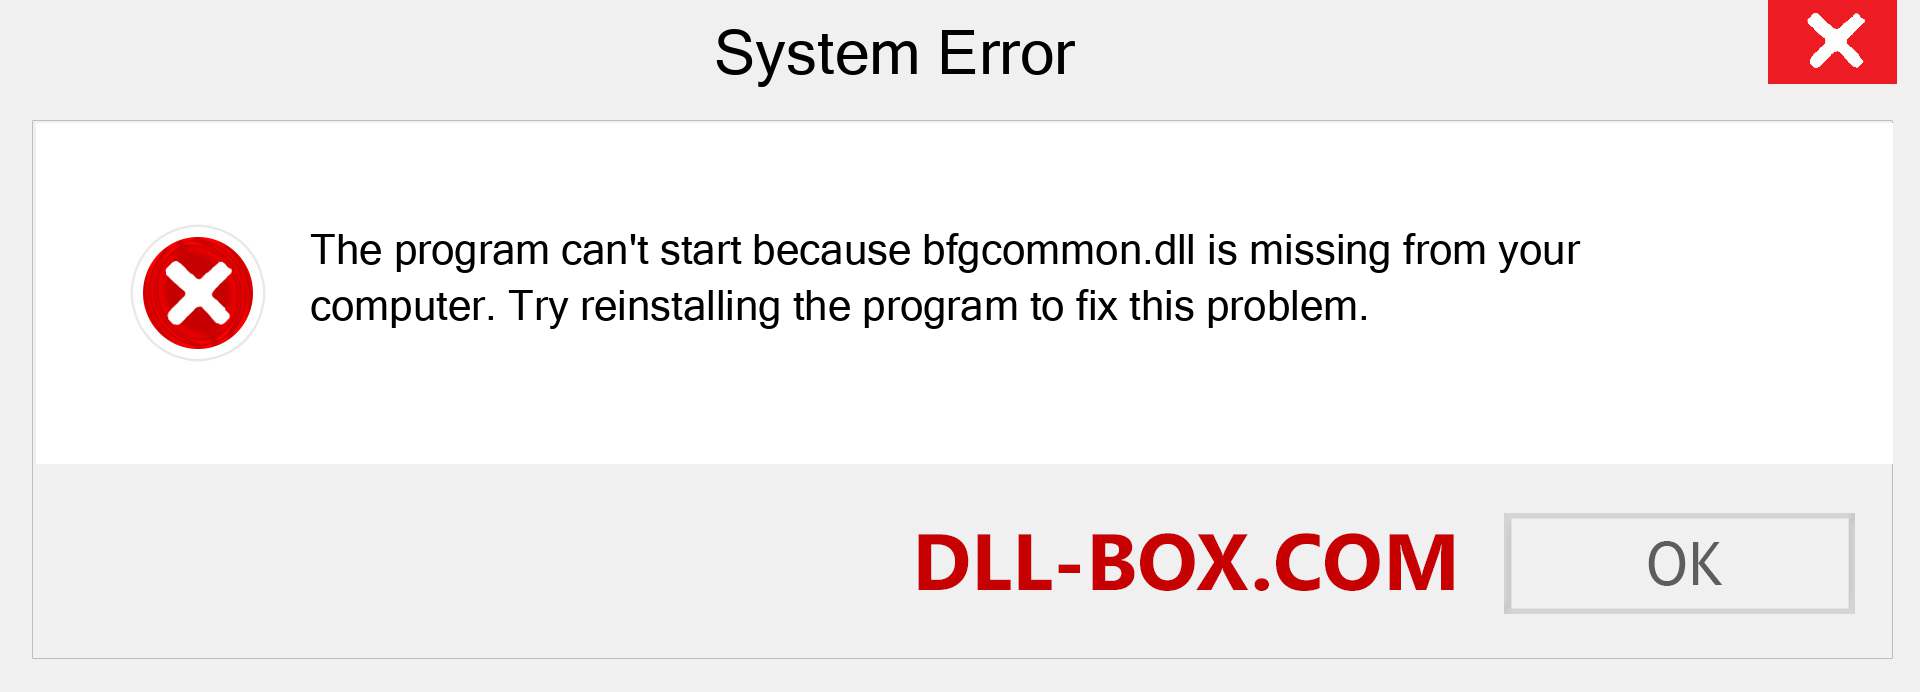  bfgcommon.dll file is missing?. Download for Windows 7, 8, 10 - Fix  bfgcommon dll Missing Error on Windows, photos, images